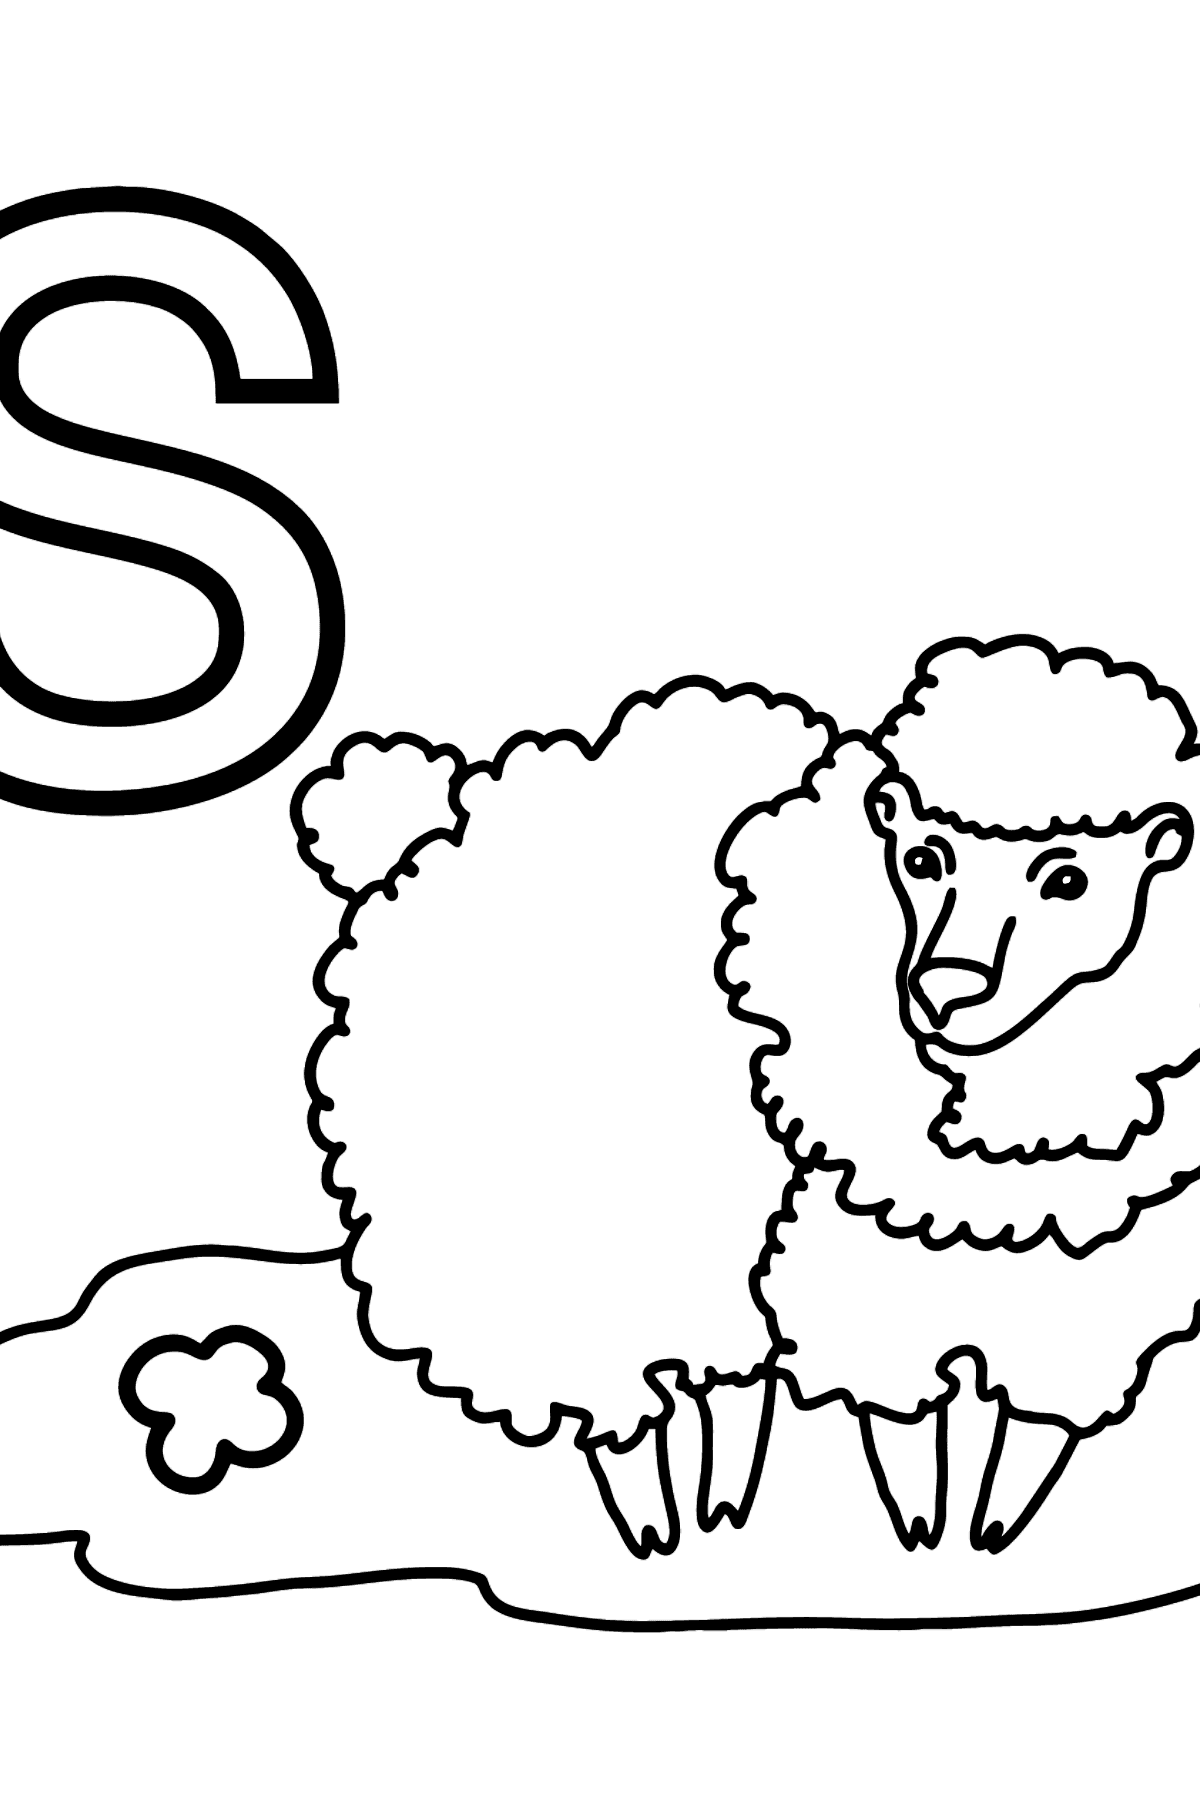 German Letter S coloring pages - SCHAF - Coloring Pages for Kids